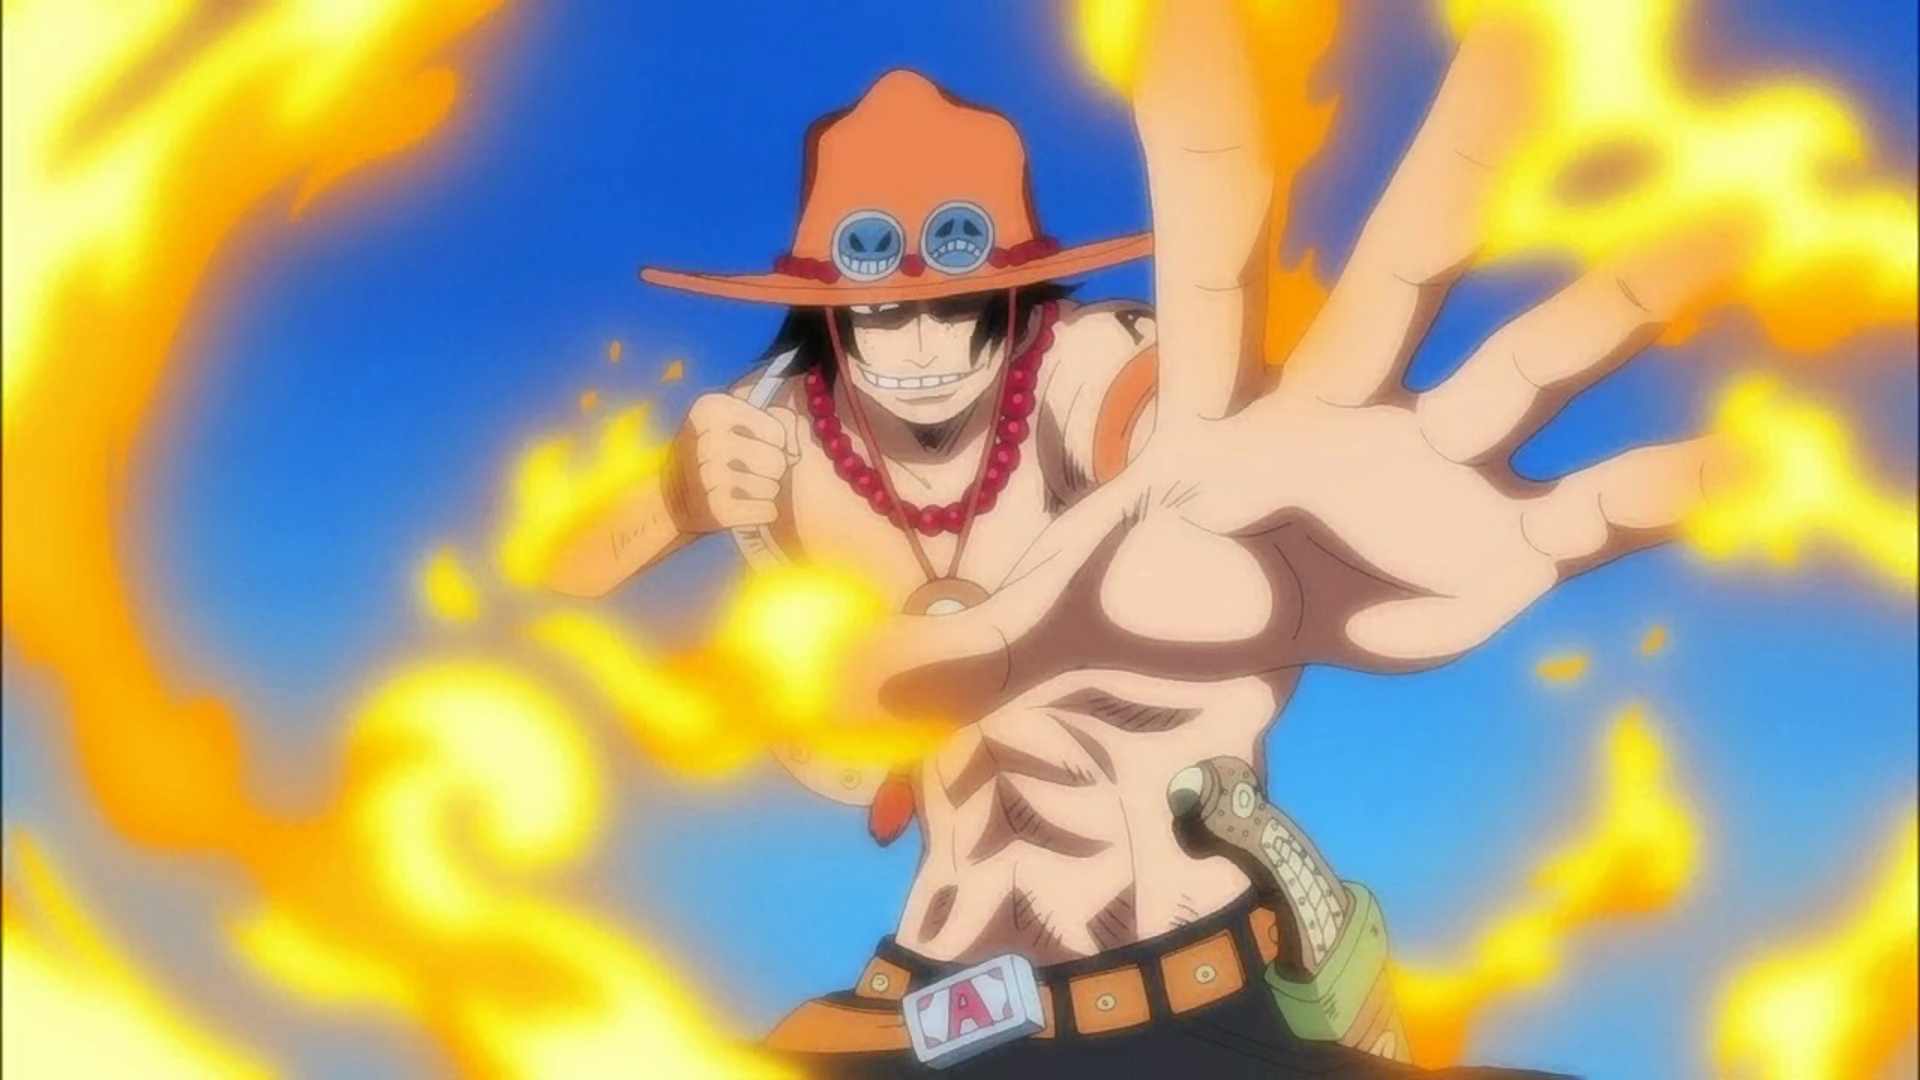 Wallpapers For > One Piece Ace Wallpapers Hd